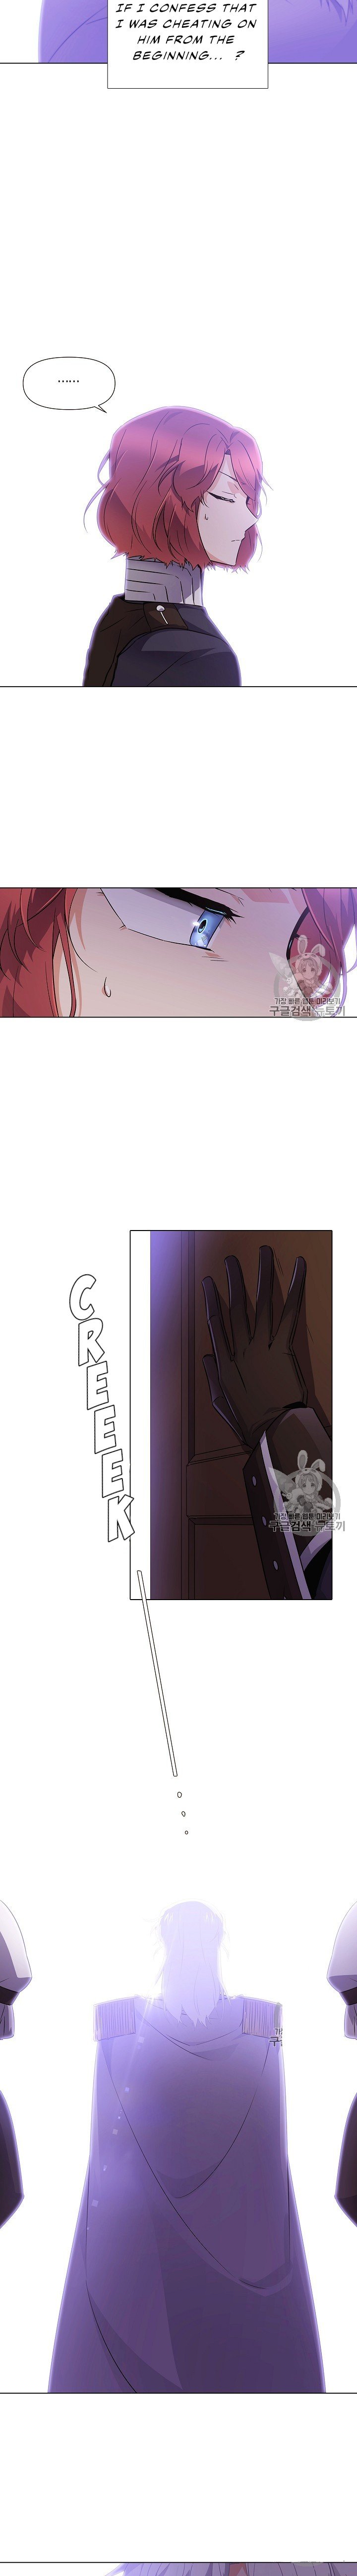 The Villain Discovered My Identity Chapter 33 - Page 14